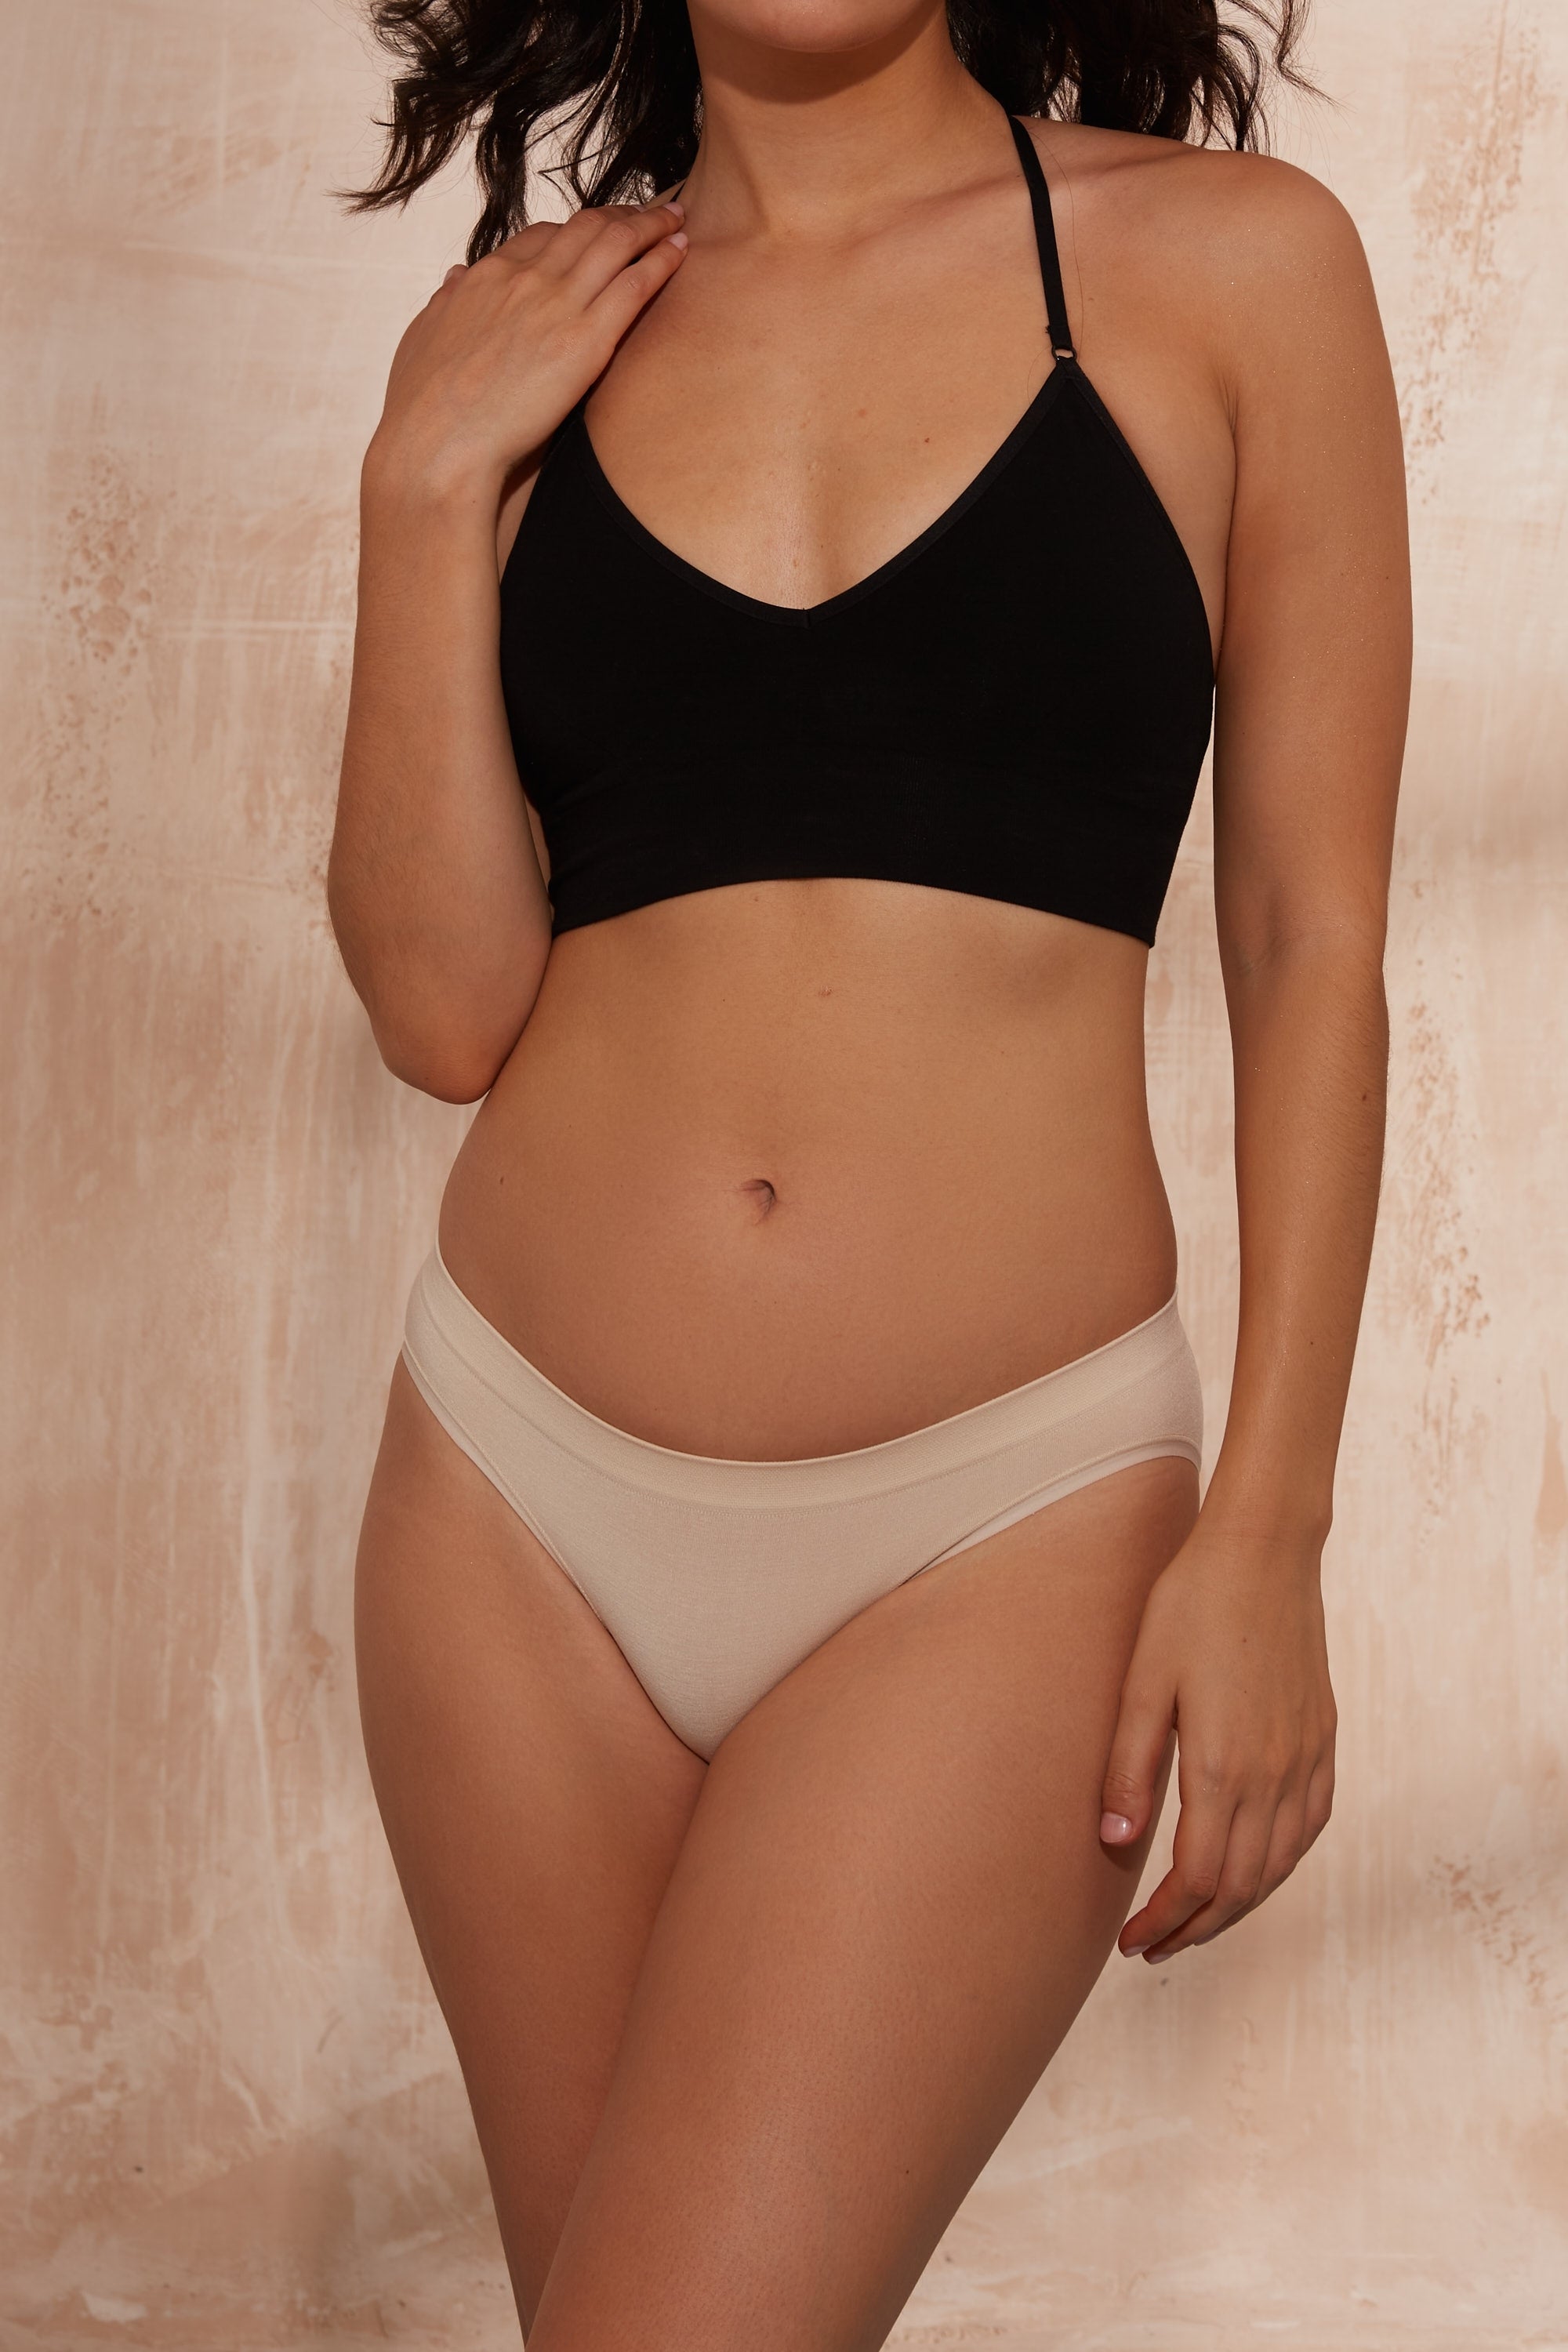 Model wearing black top and beige briefs for sustainable activewear brand, Jilla.